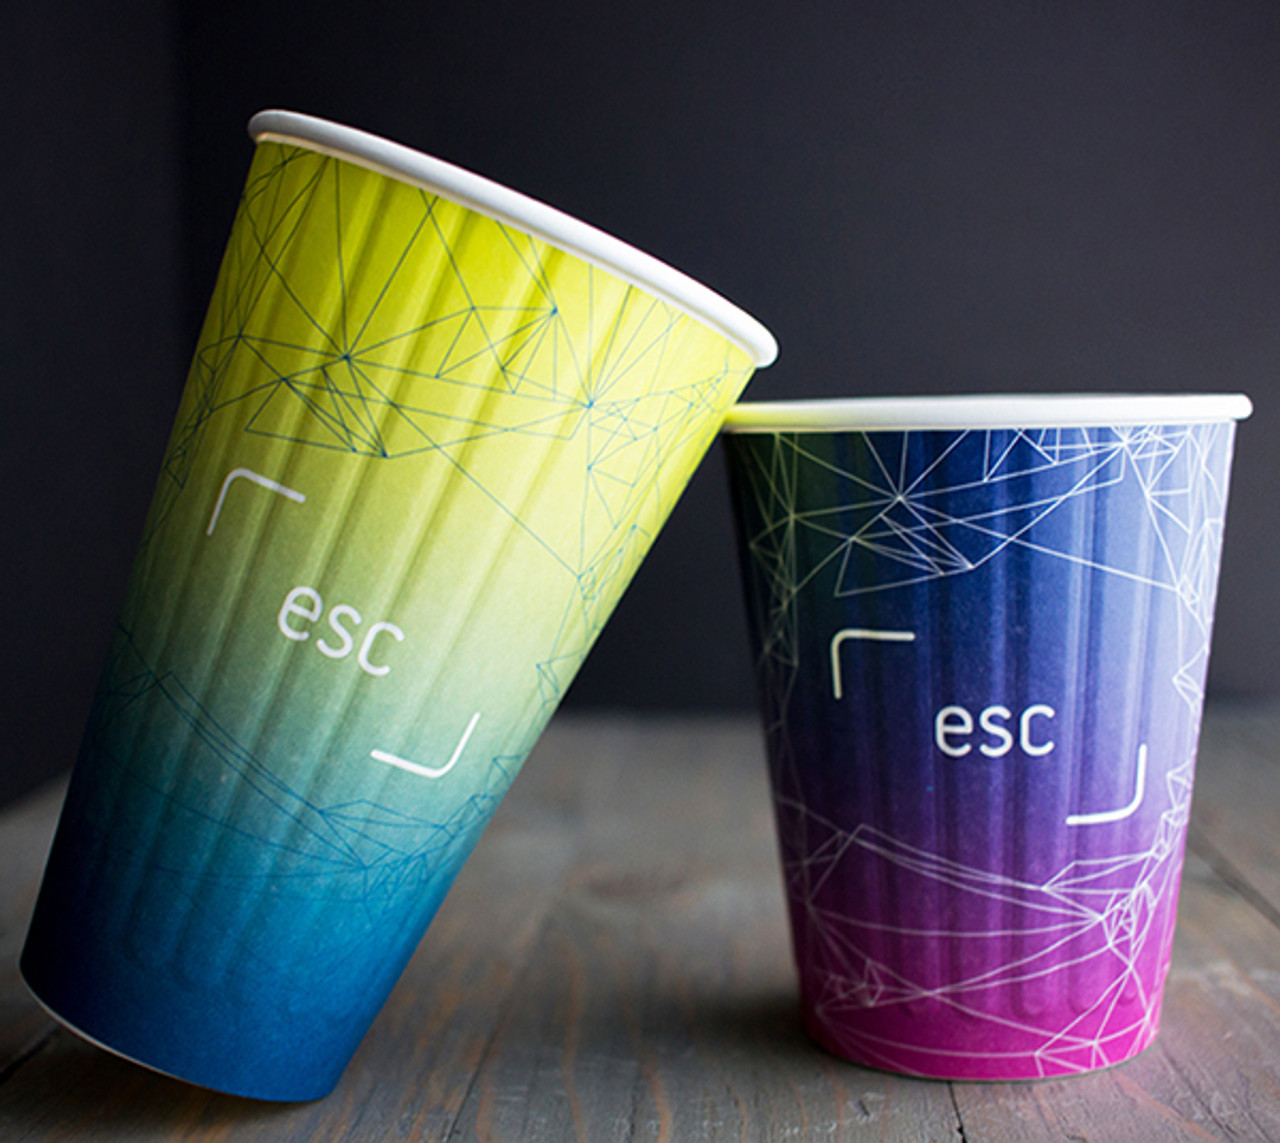 Double Wall Paper Cup 16oz unique printing quality from CupPrint USA